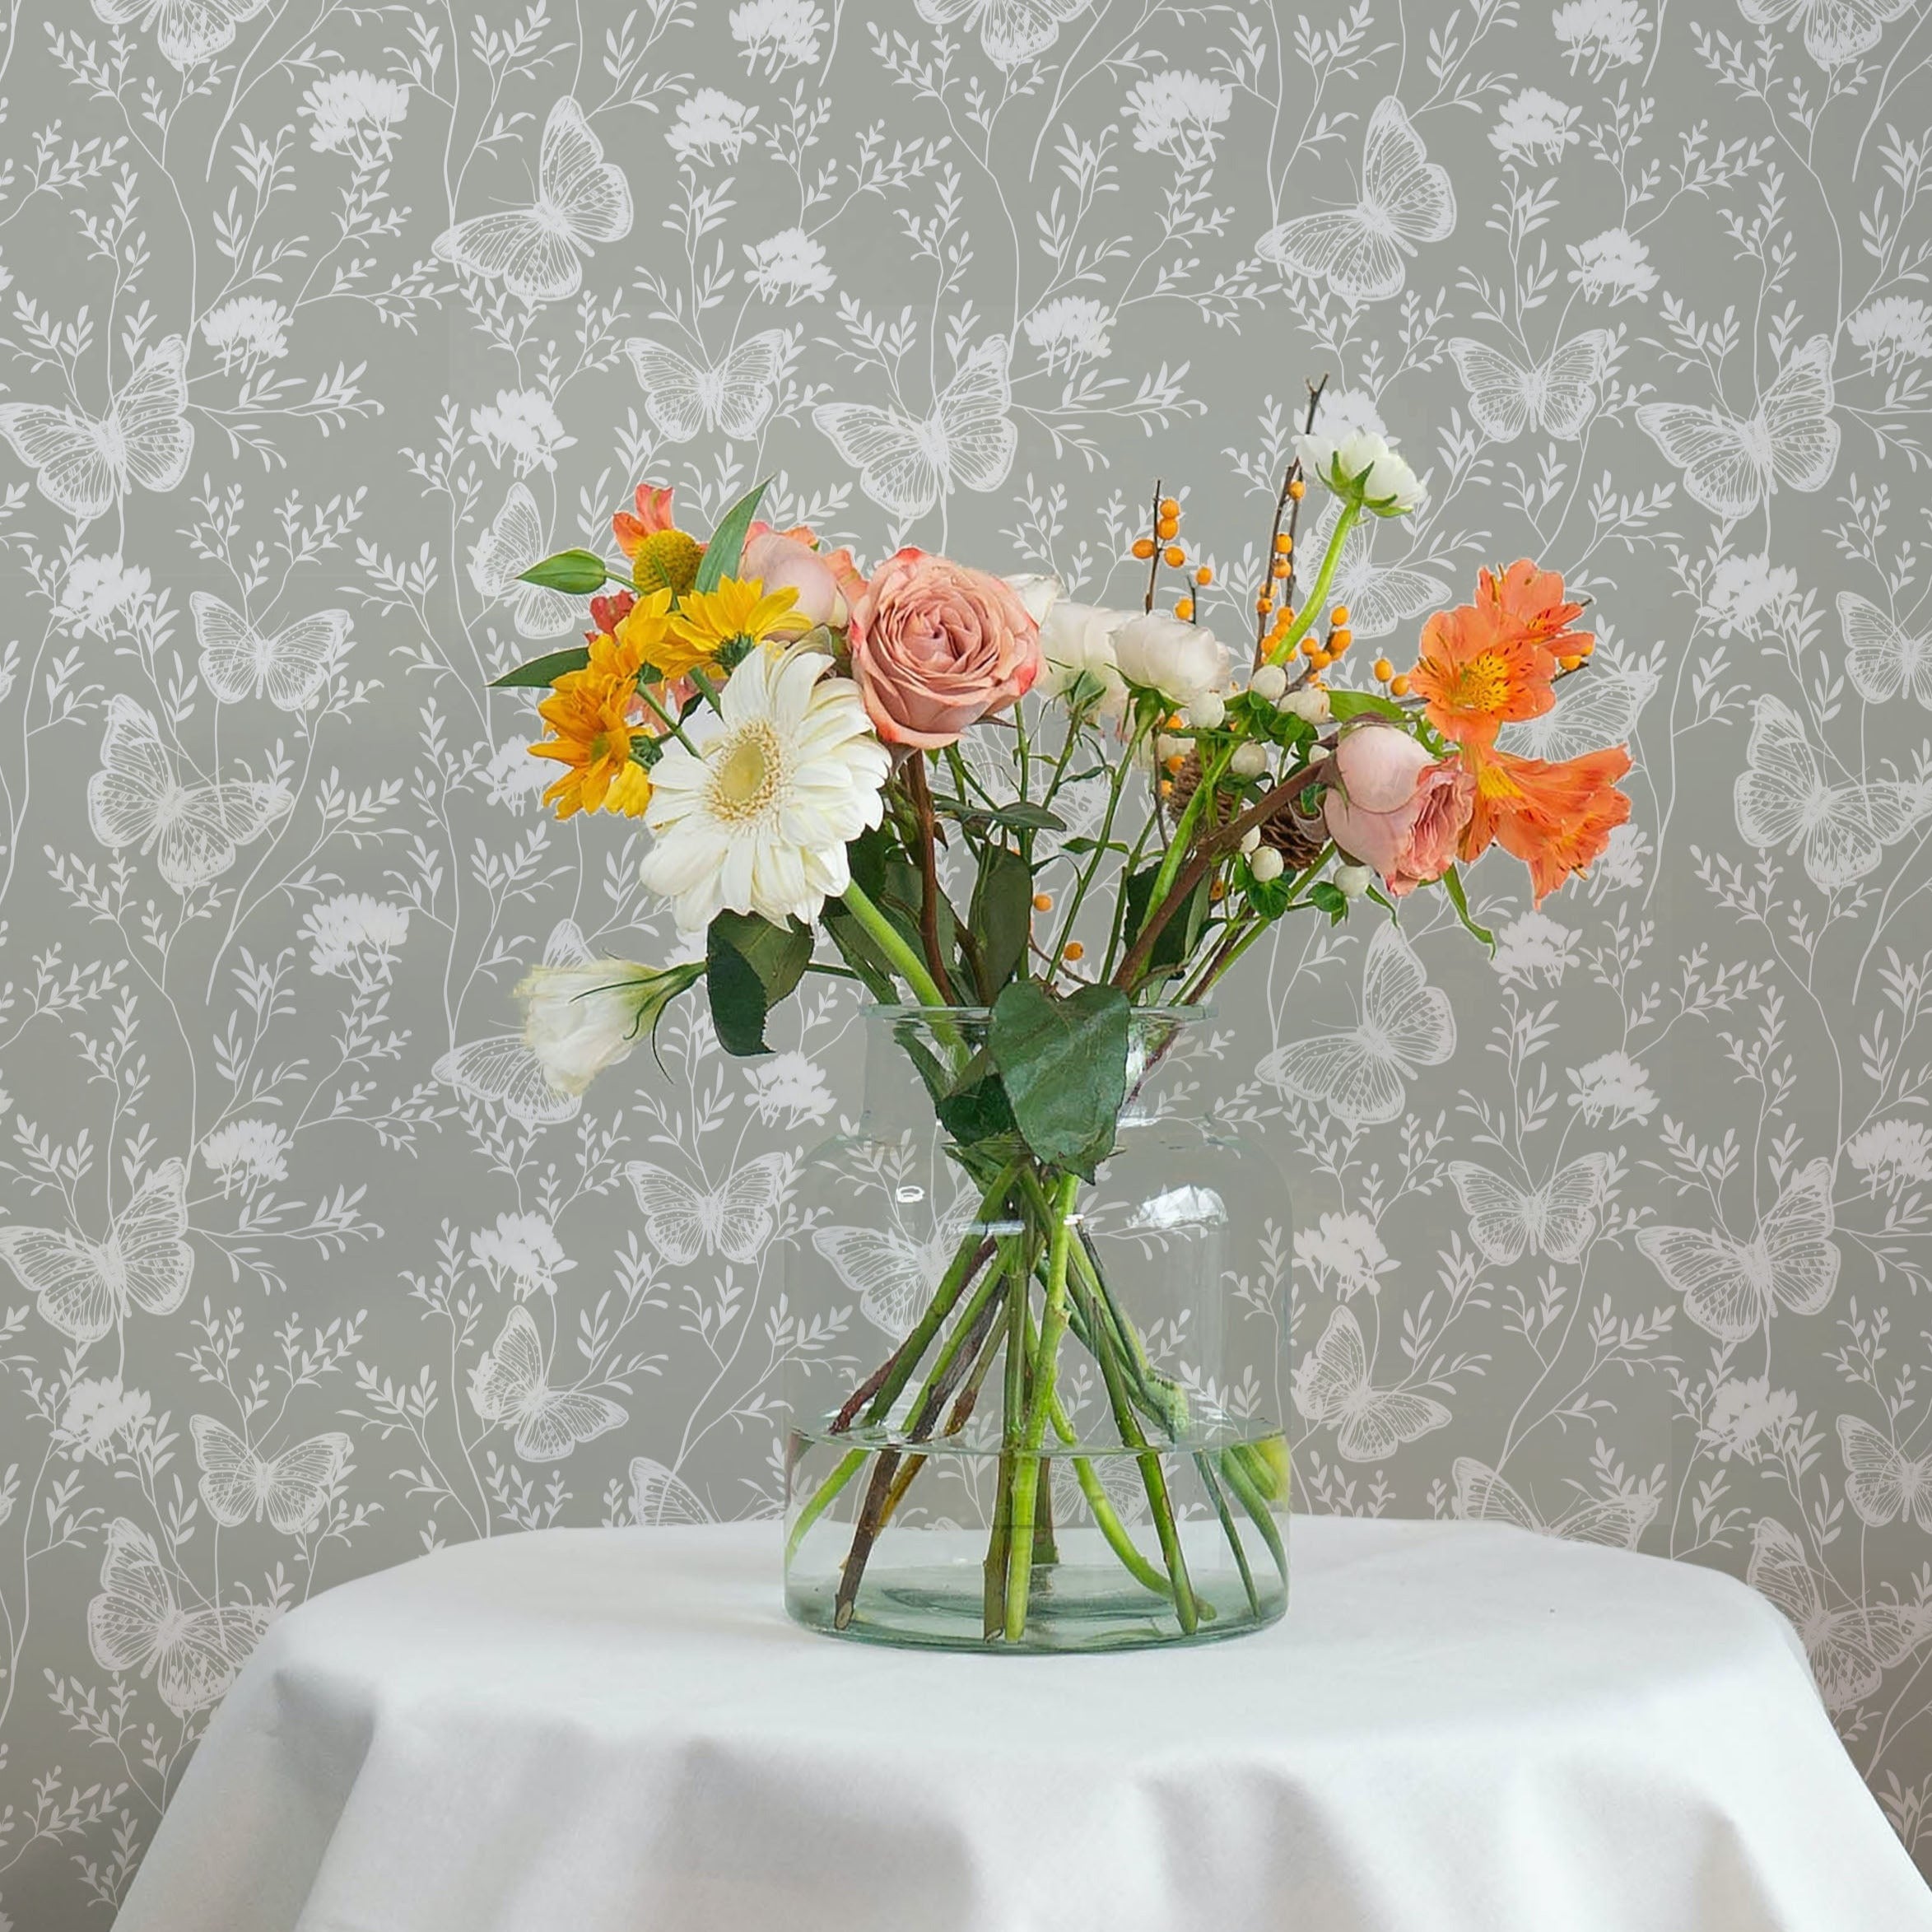 An elegant home decor arrangement using the Whimsical Wings Wallpaper-Olive, with a vase of vibrant, colorful flowers set against the wallpaper, highlighting its delicate butterfly and floral motifs.